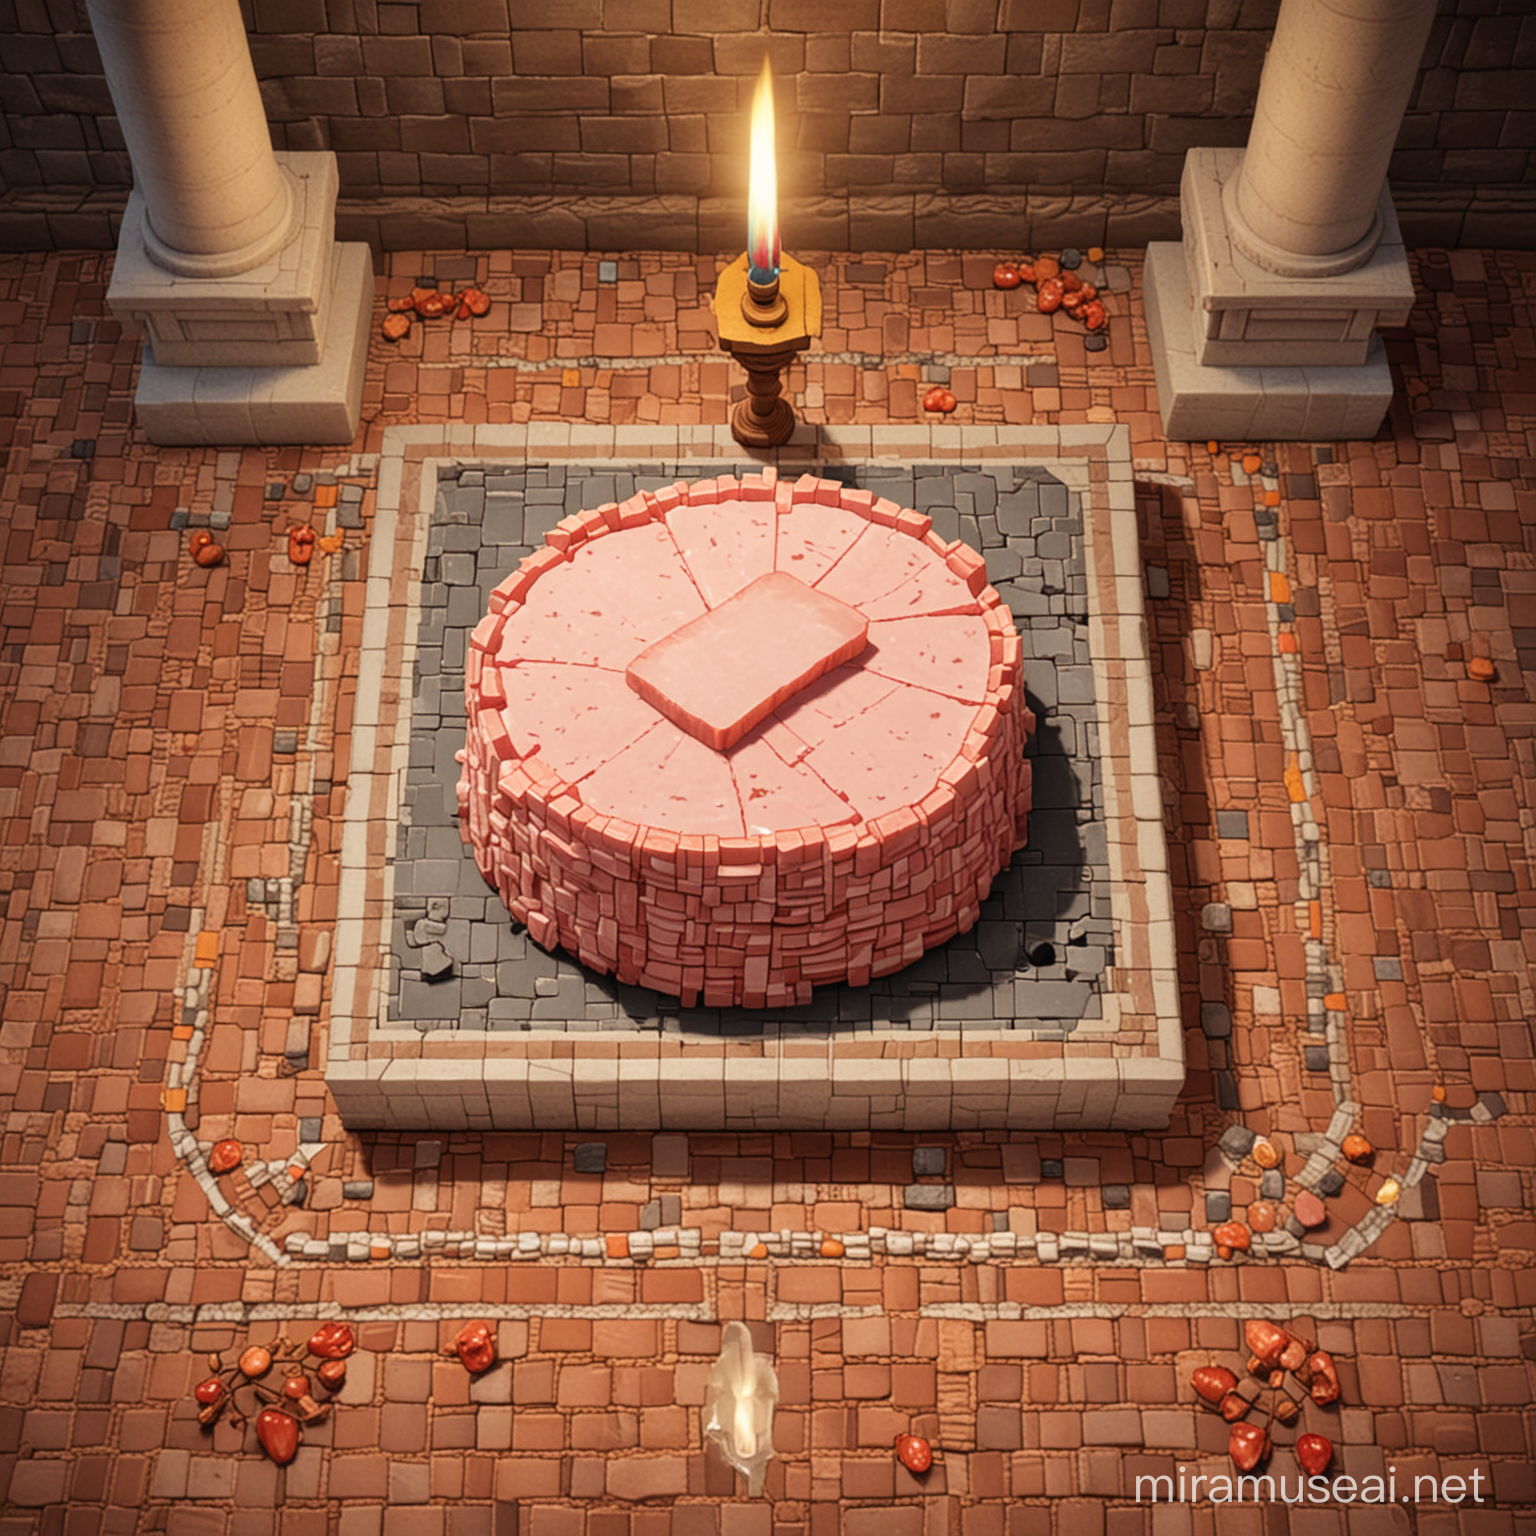 a pixel sprite of a ham slice
in the middle of a altar
